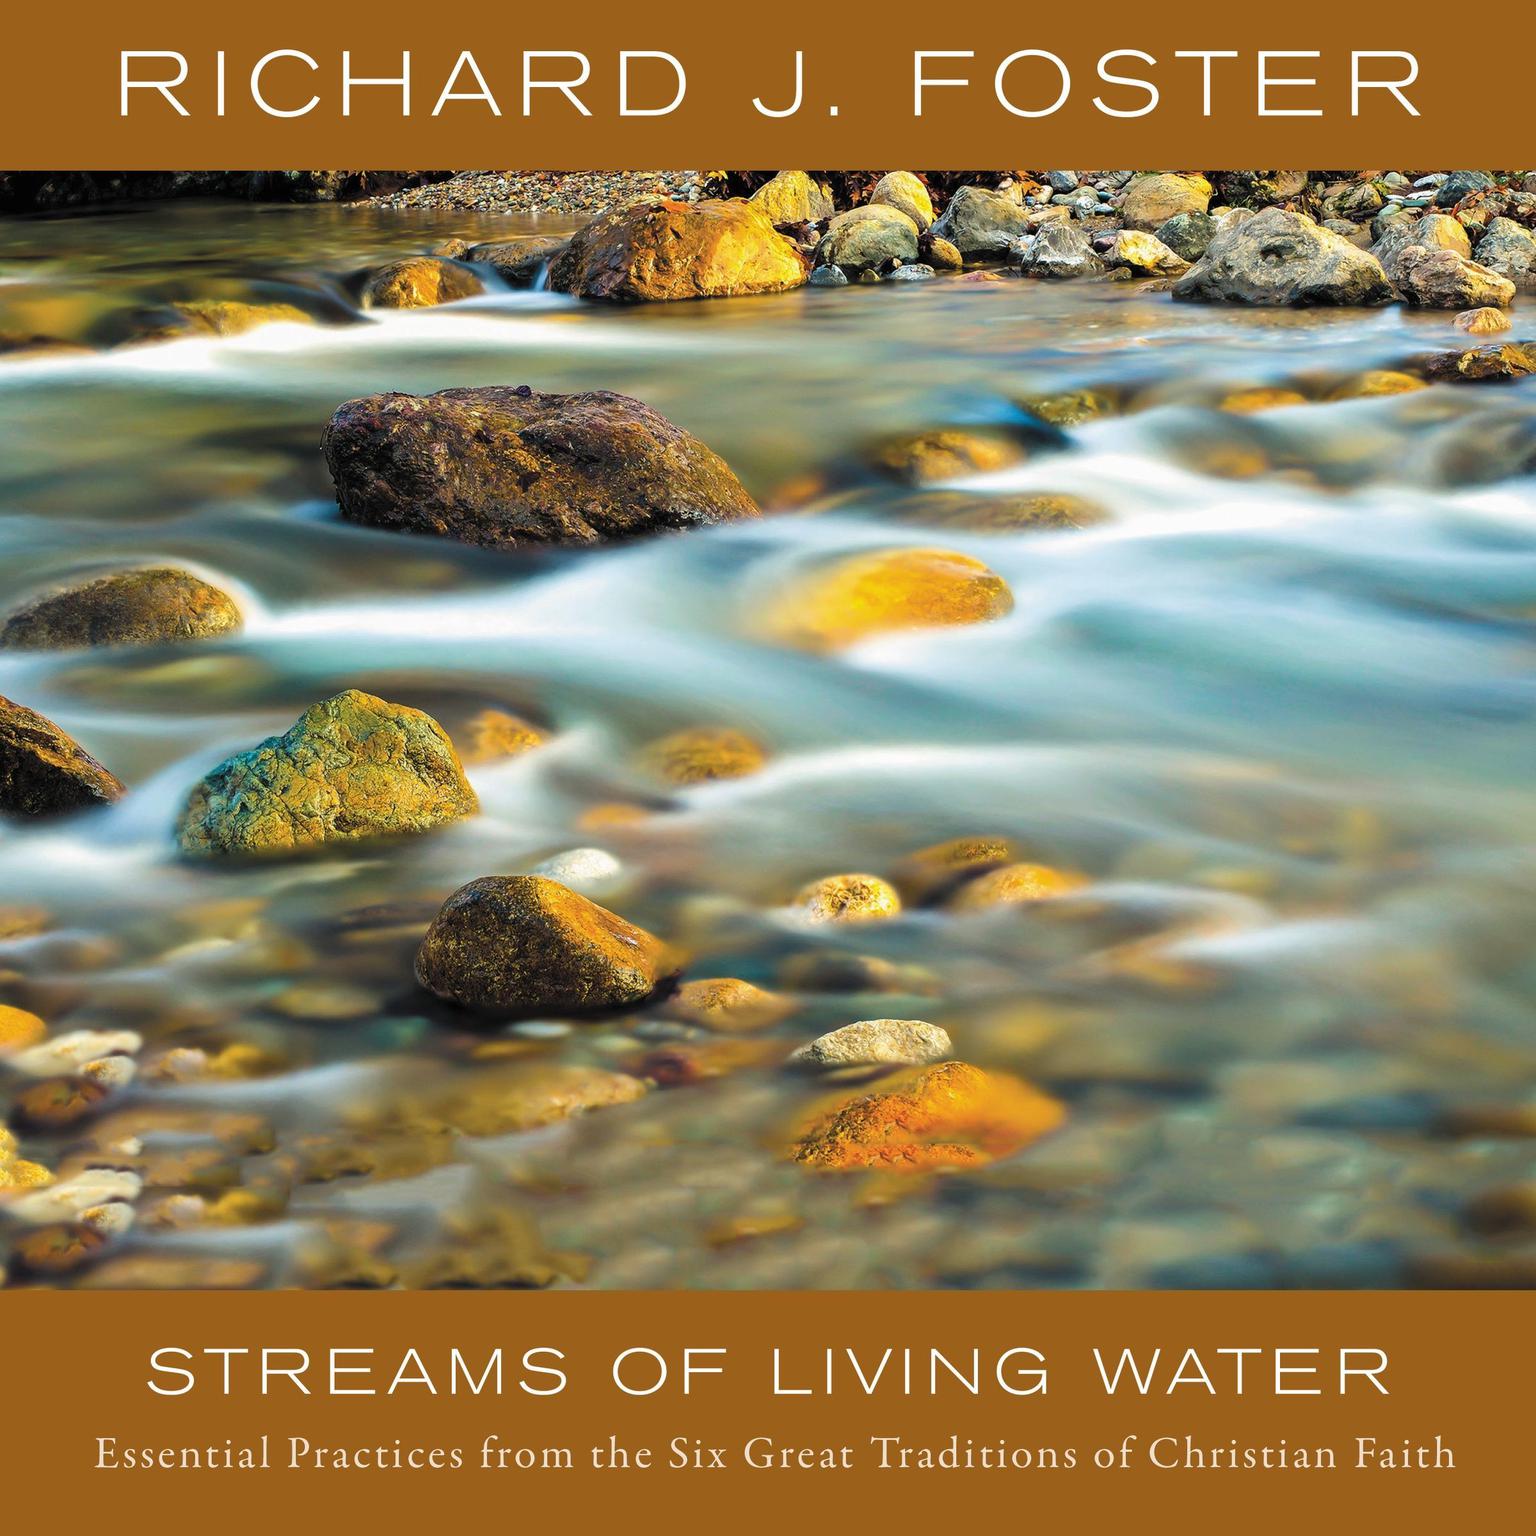 STREAMS OF LIVING WATER (Abridged): Essential Practices from the Six Great Traditions of Christian Faith Audiobook, by Richard J. Foster